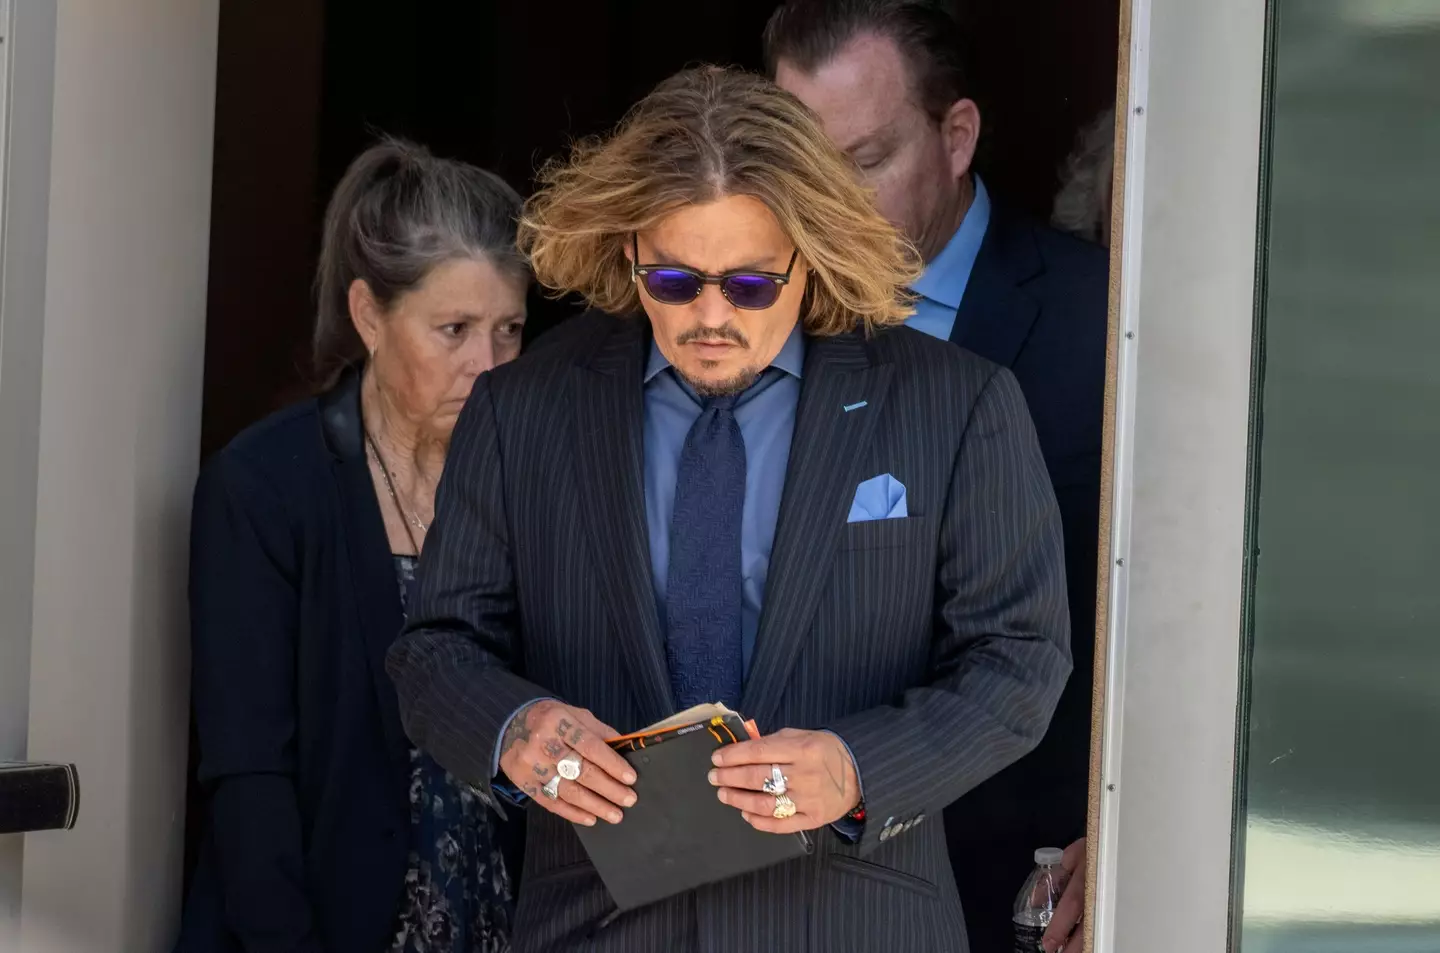 Johnny Depp gave testimony about his drug use during the trial.